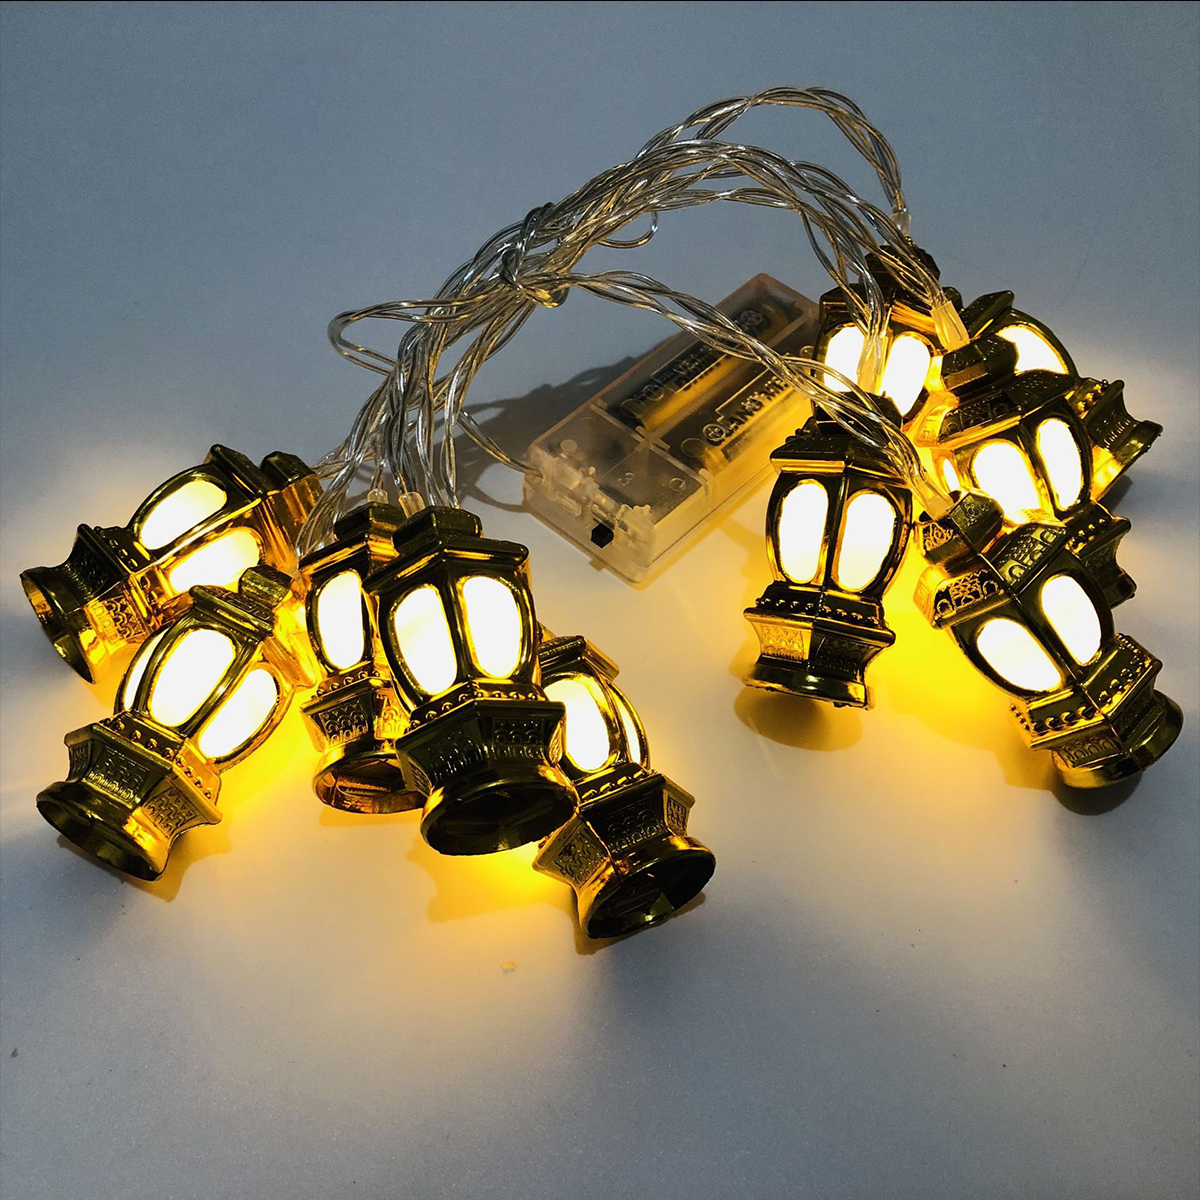 165m-LED-Fairy-Lights-Multicolored-Lantern-RO-Palace-Lamp-Party-Home-Decor-1685474-1